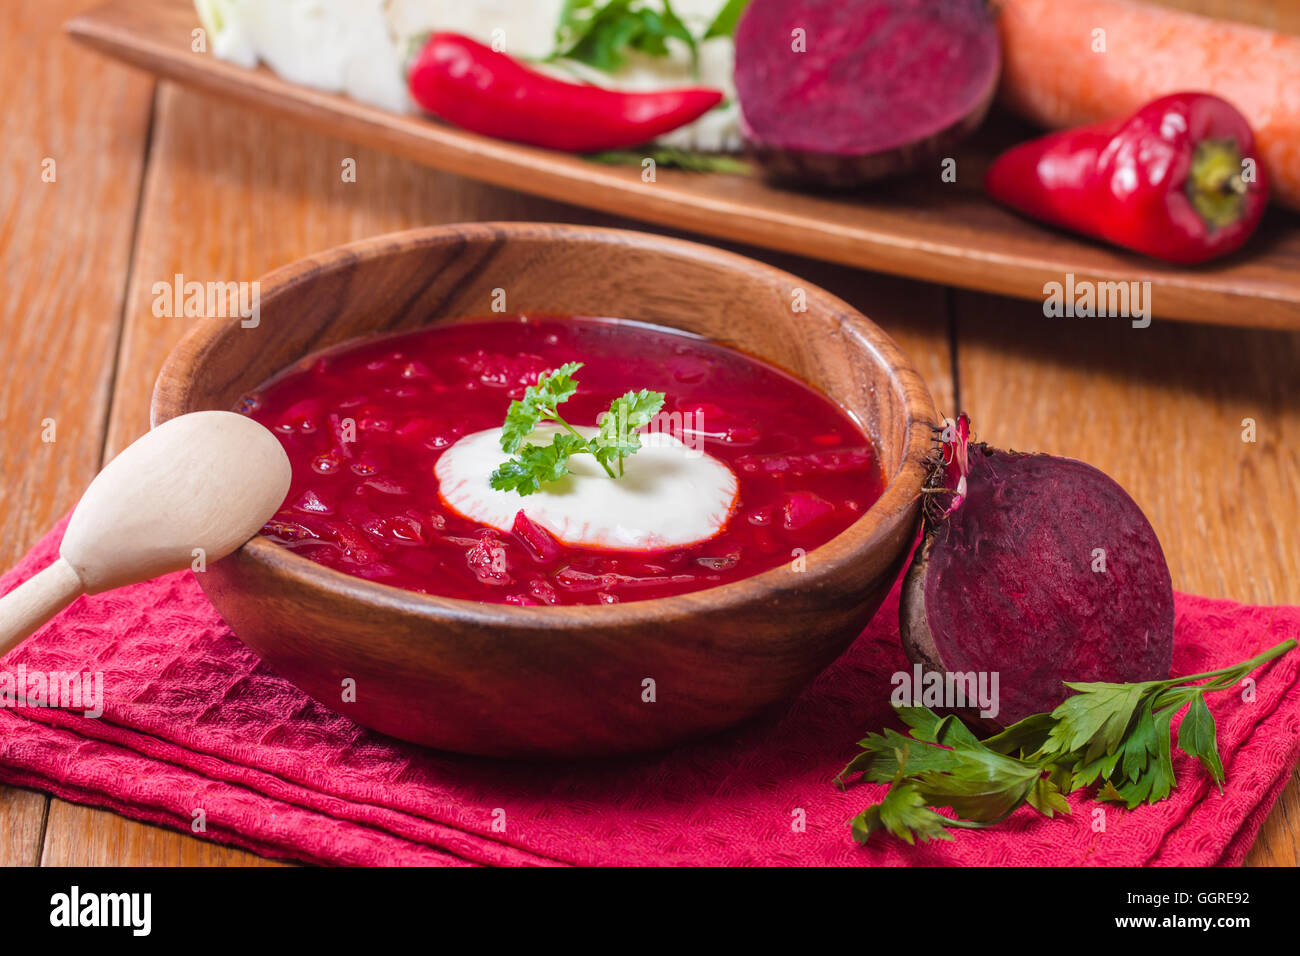 Soup with red beets Stock Photo